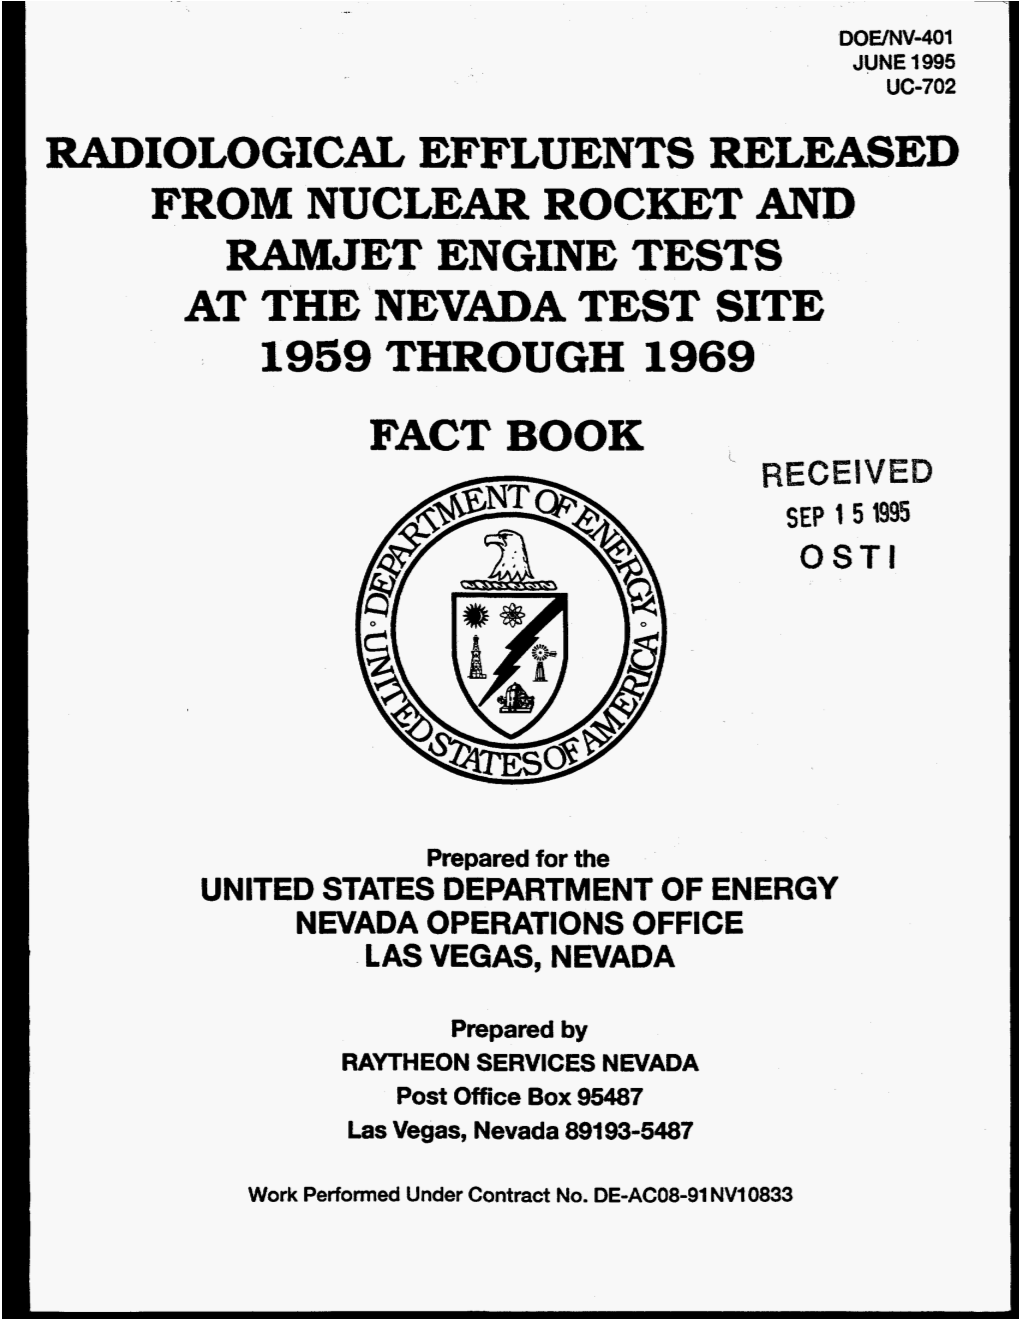 RADIOLOGICAL EFFLUENTS RELEASED from NUCLEAR ROCKET and Ralvijet ENGINE TESTS at the NEVADA TEST SITE 1959 THROUGH 1969 FACT BOOK